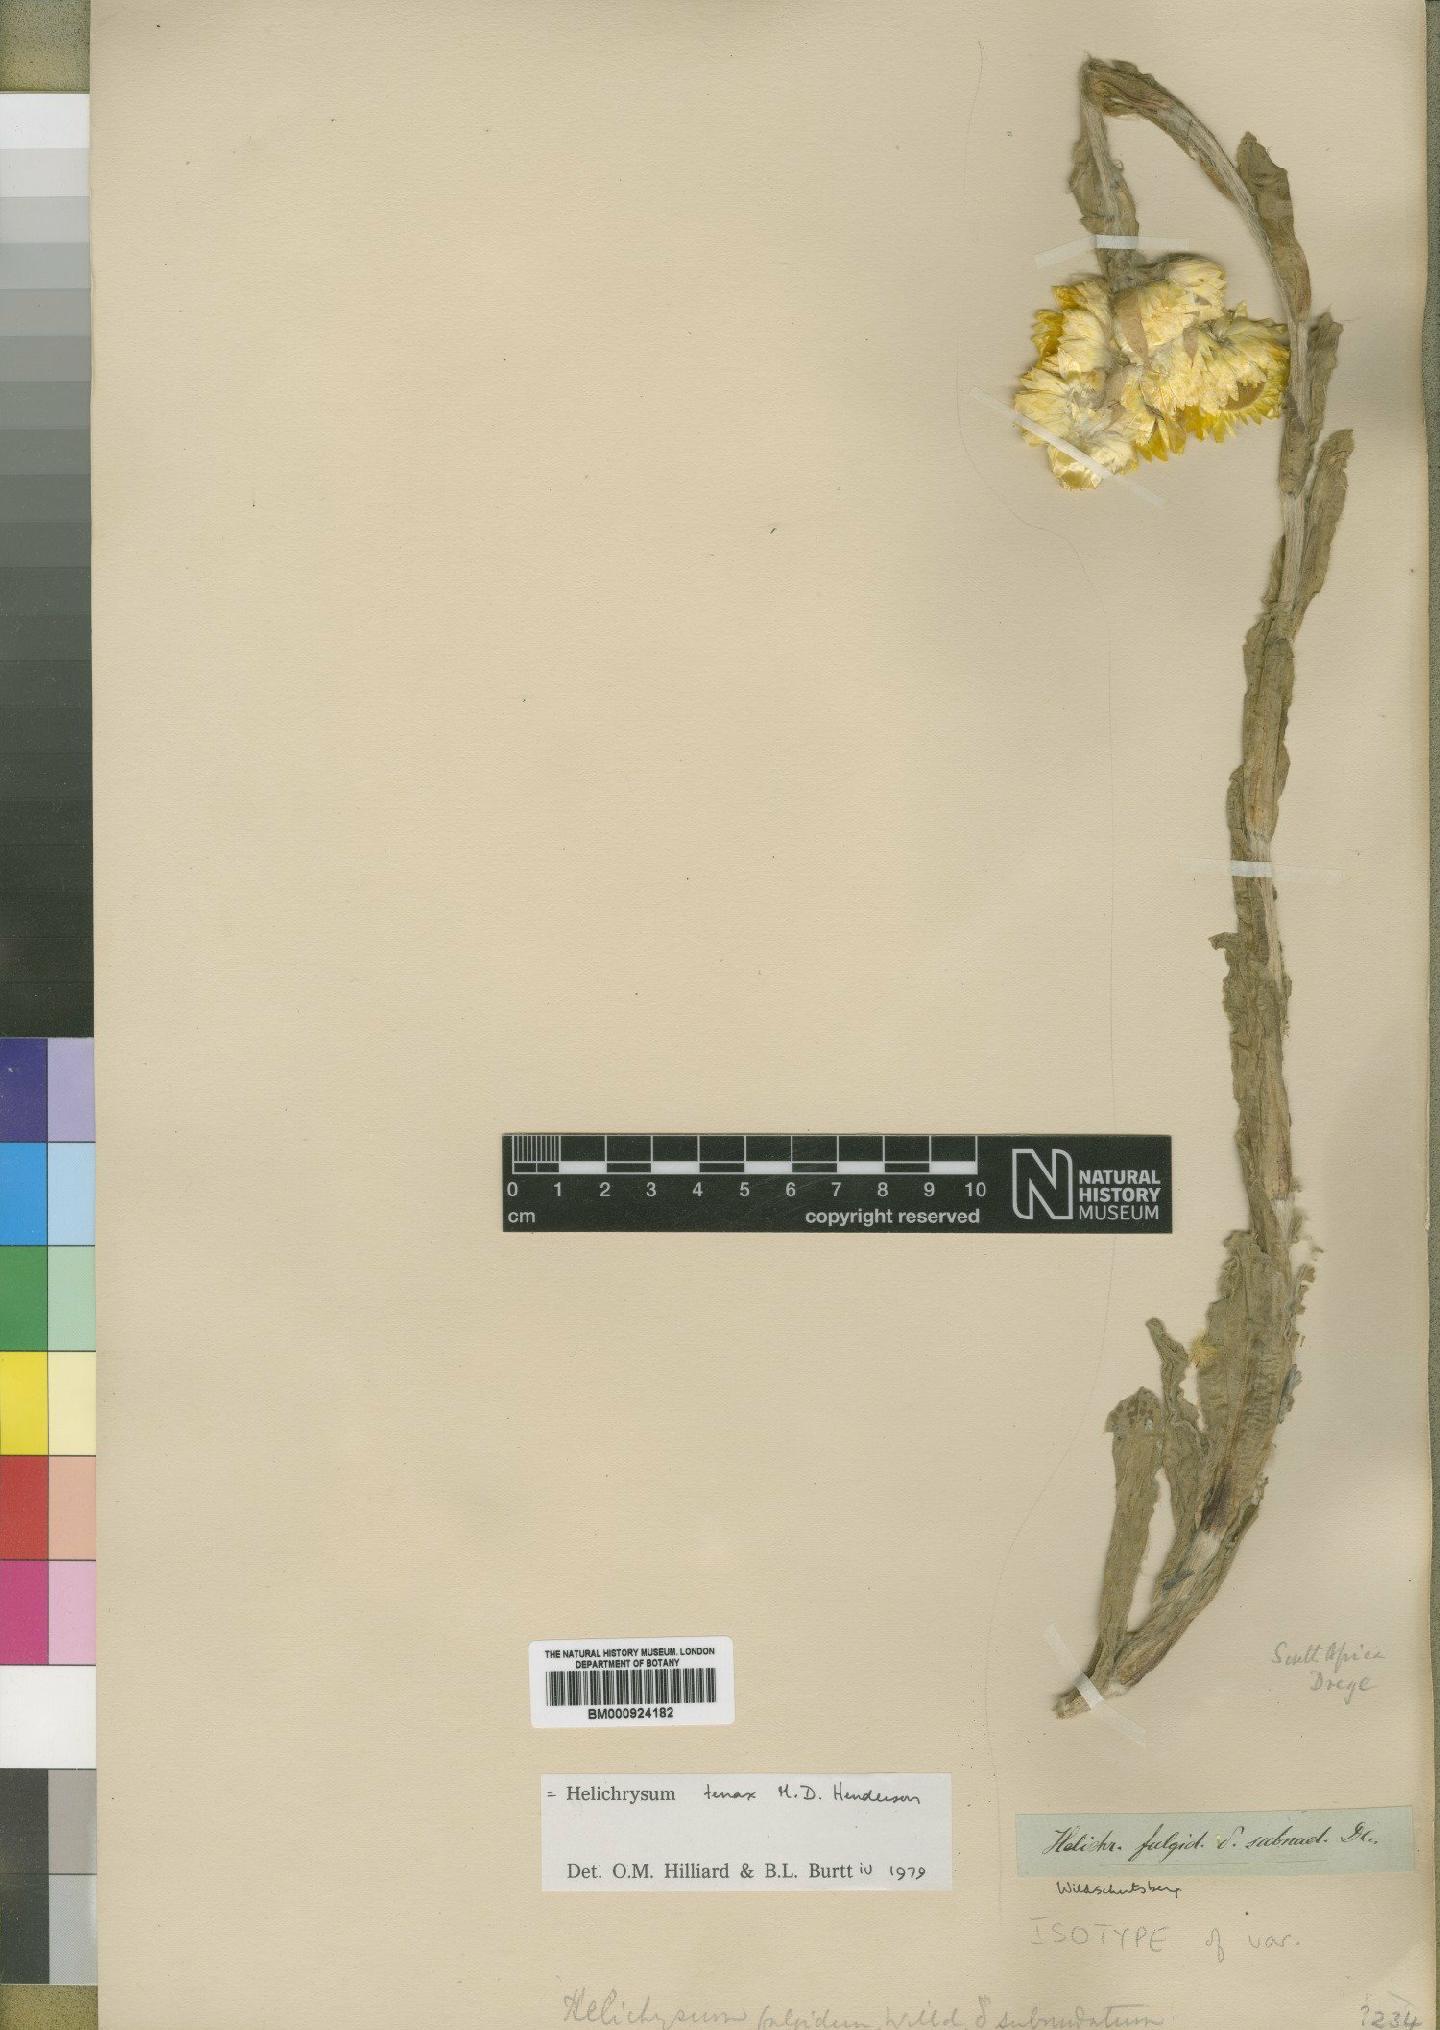 To NHMUK collection (Helichrysum tenax Hend; Isotype; NHMUK:ecatalogue:4529210)